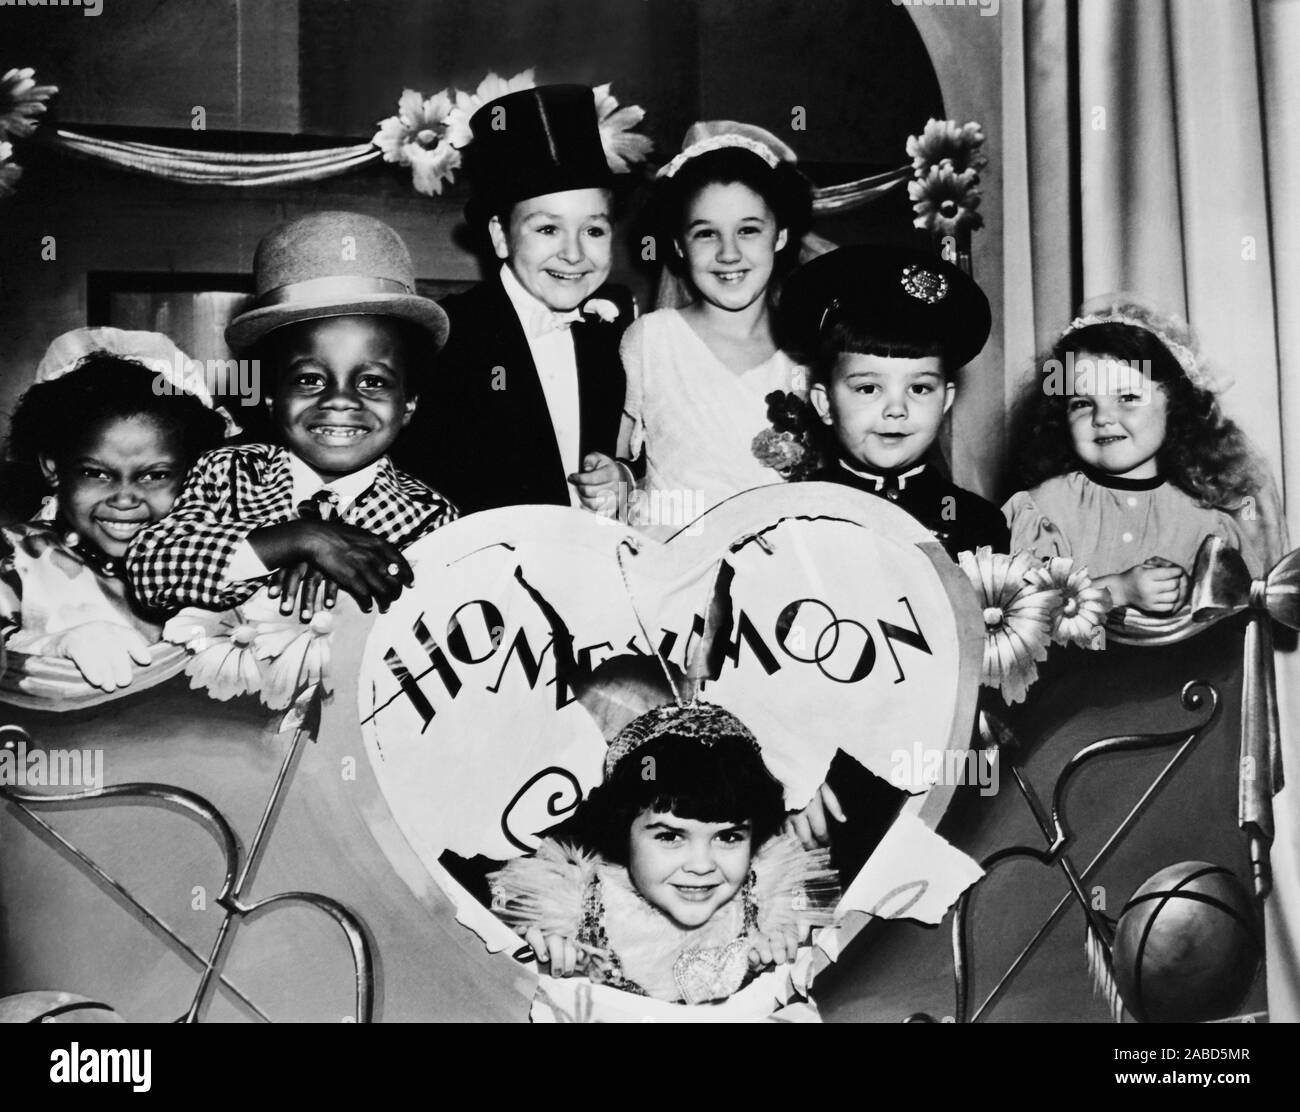 OUR GANG FOLLIES OF 1938, Darla Hood (front), Billie 'Buckwheat' Thomas (second from left), Eugene 'Porky' Lee (second from right), 1937 Stock Photo